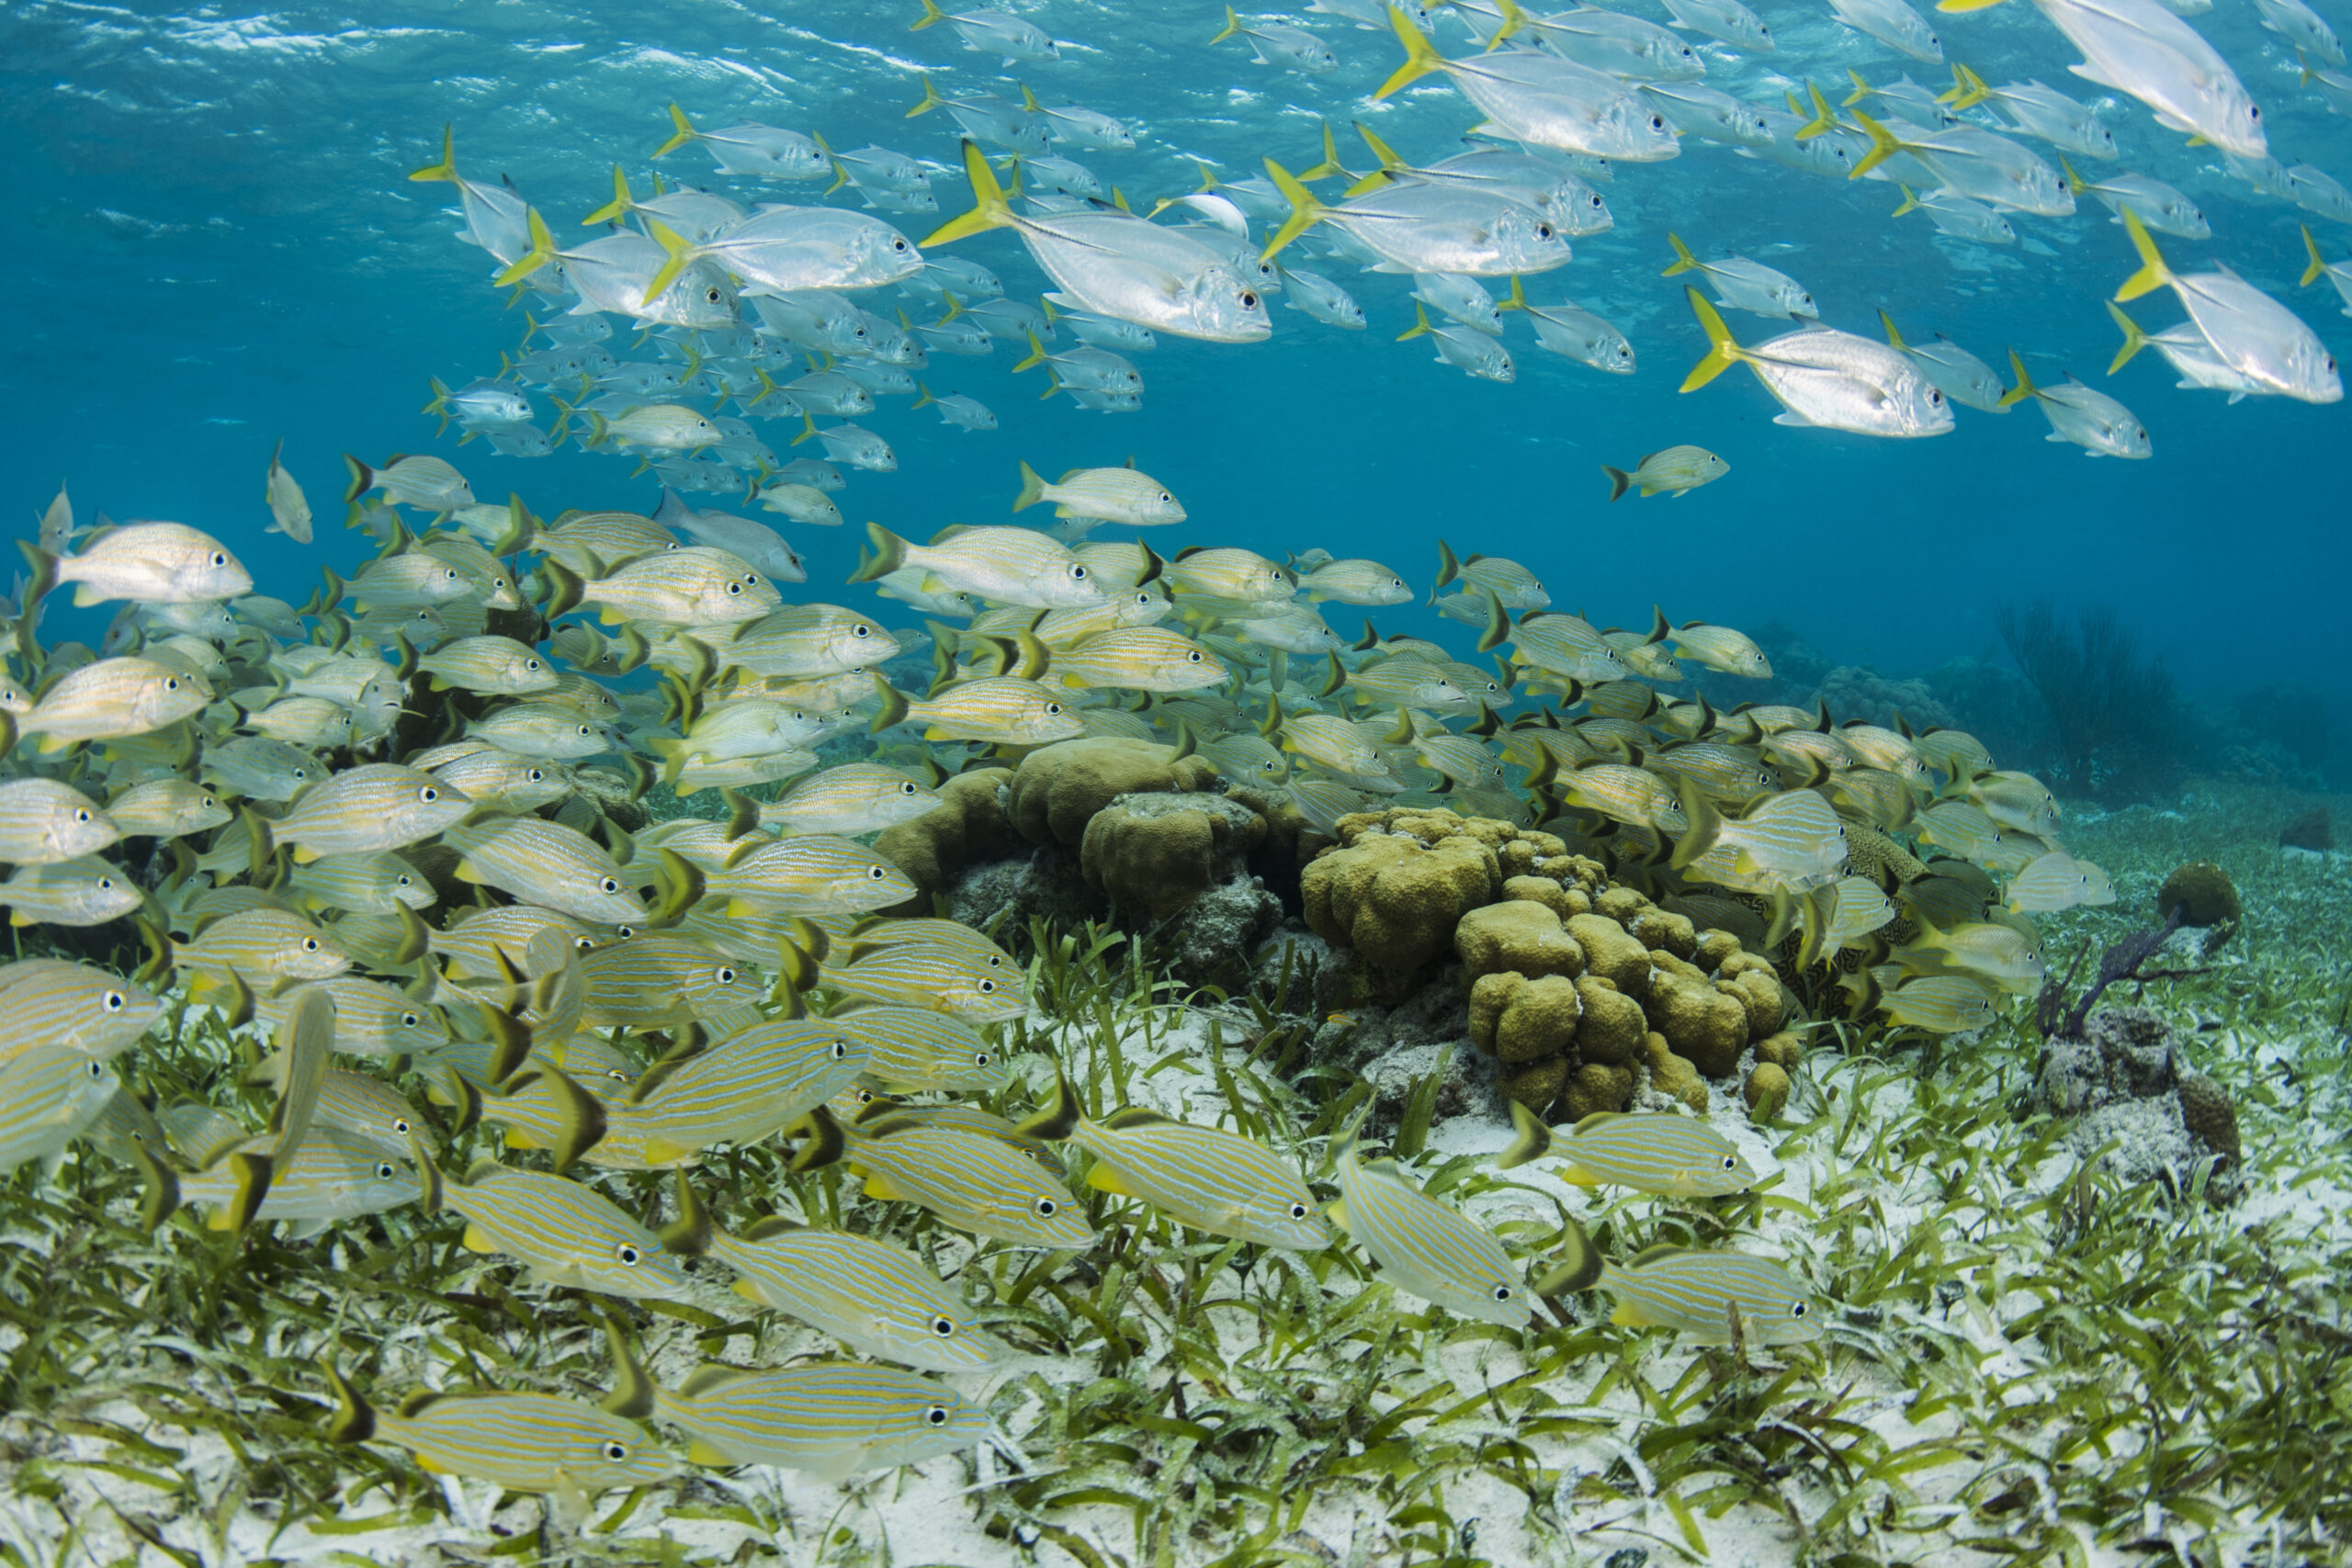 A school of grunts and horse-eye jack fish swim above a reef in Hol Chan Marine Reserve near Ambergris Cay, Belize.